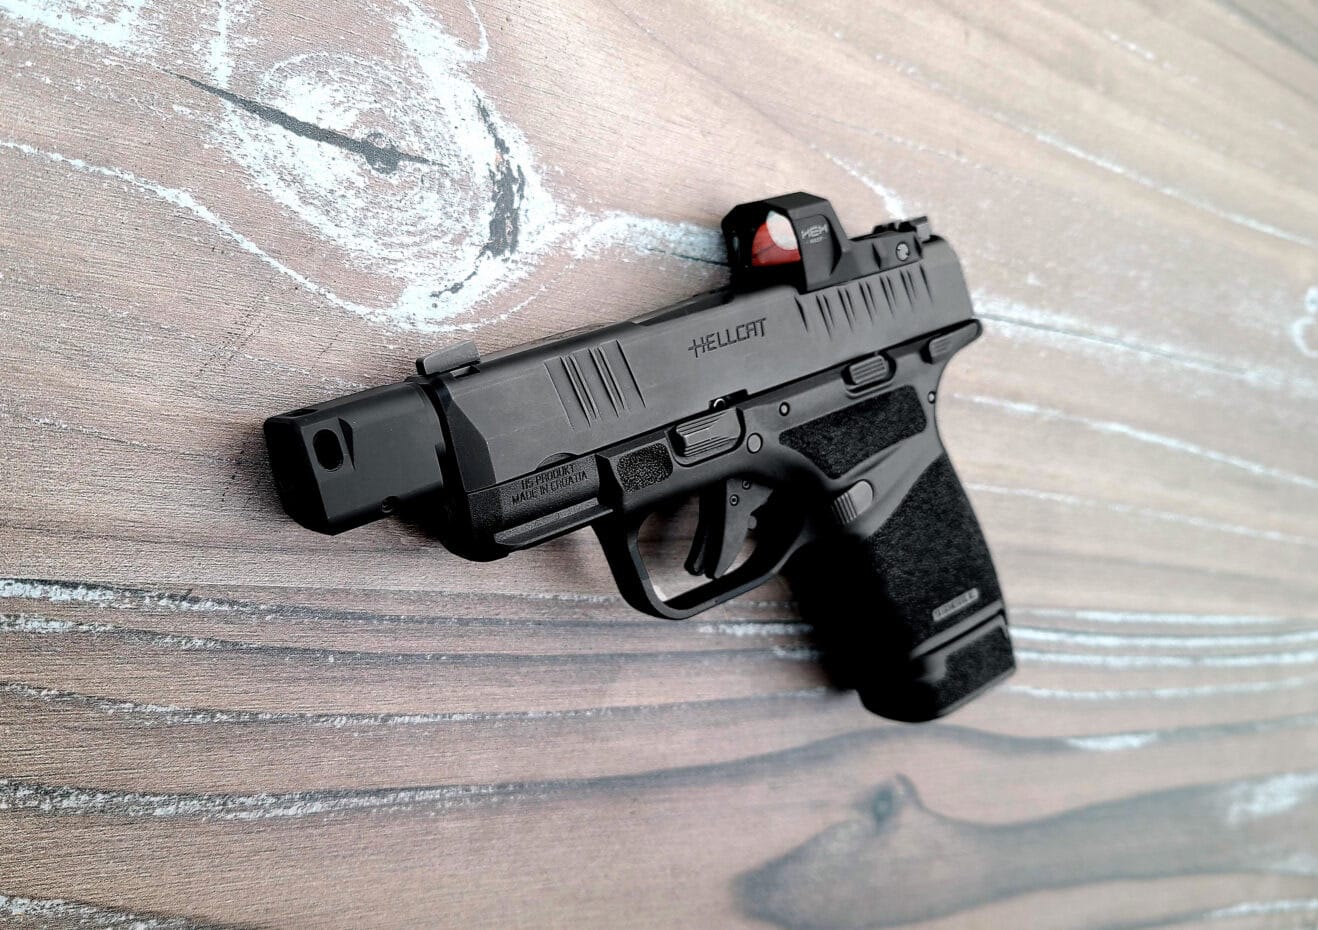 Springfield Armory Hellcat RDP pistol with HEX Wasp optic